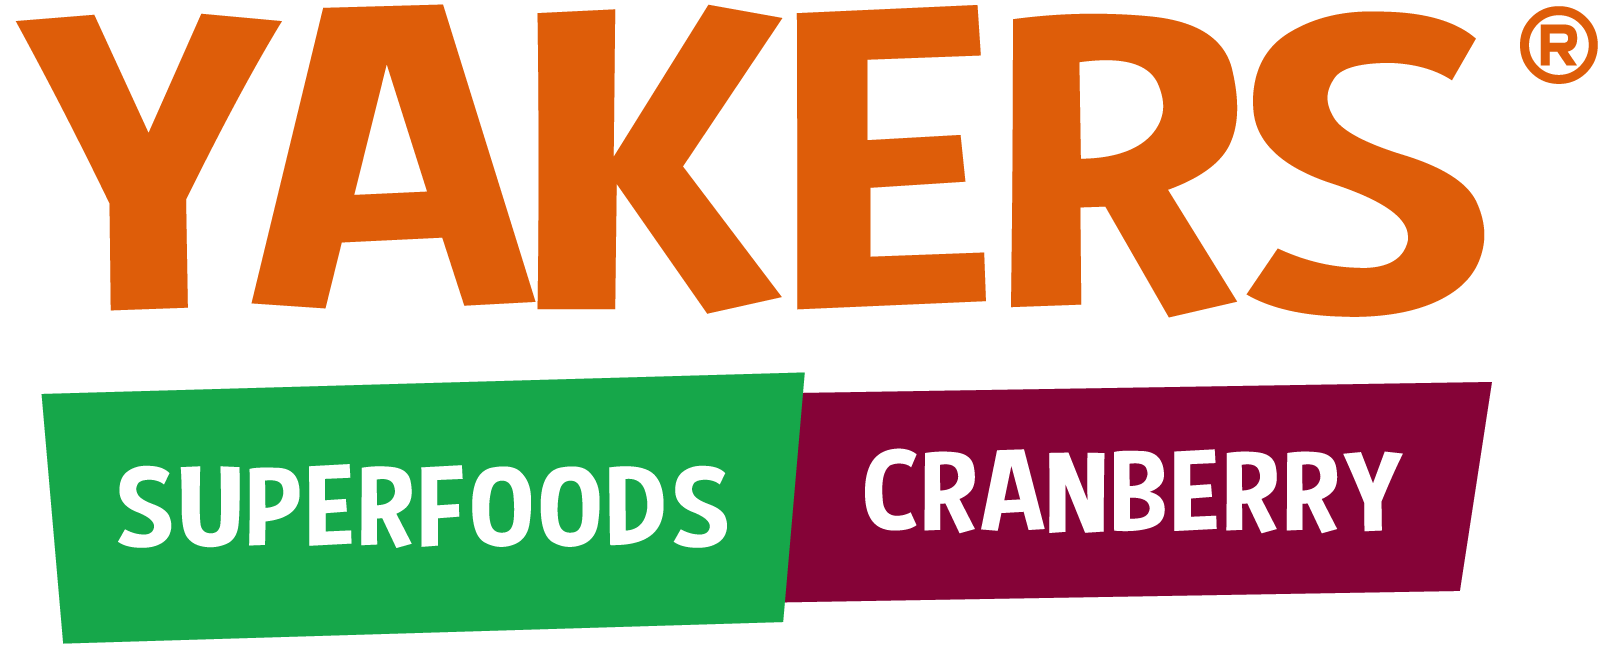 yakers superfood cranberry logo